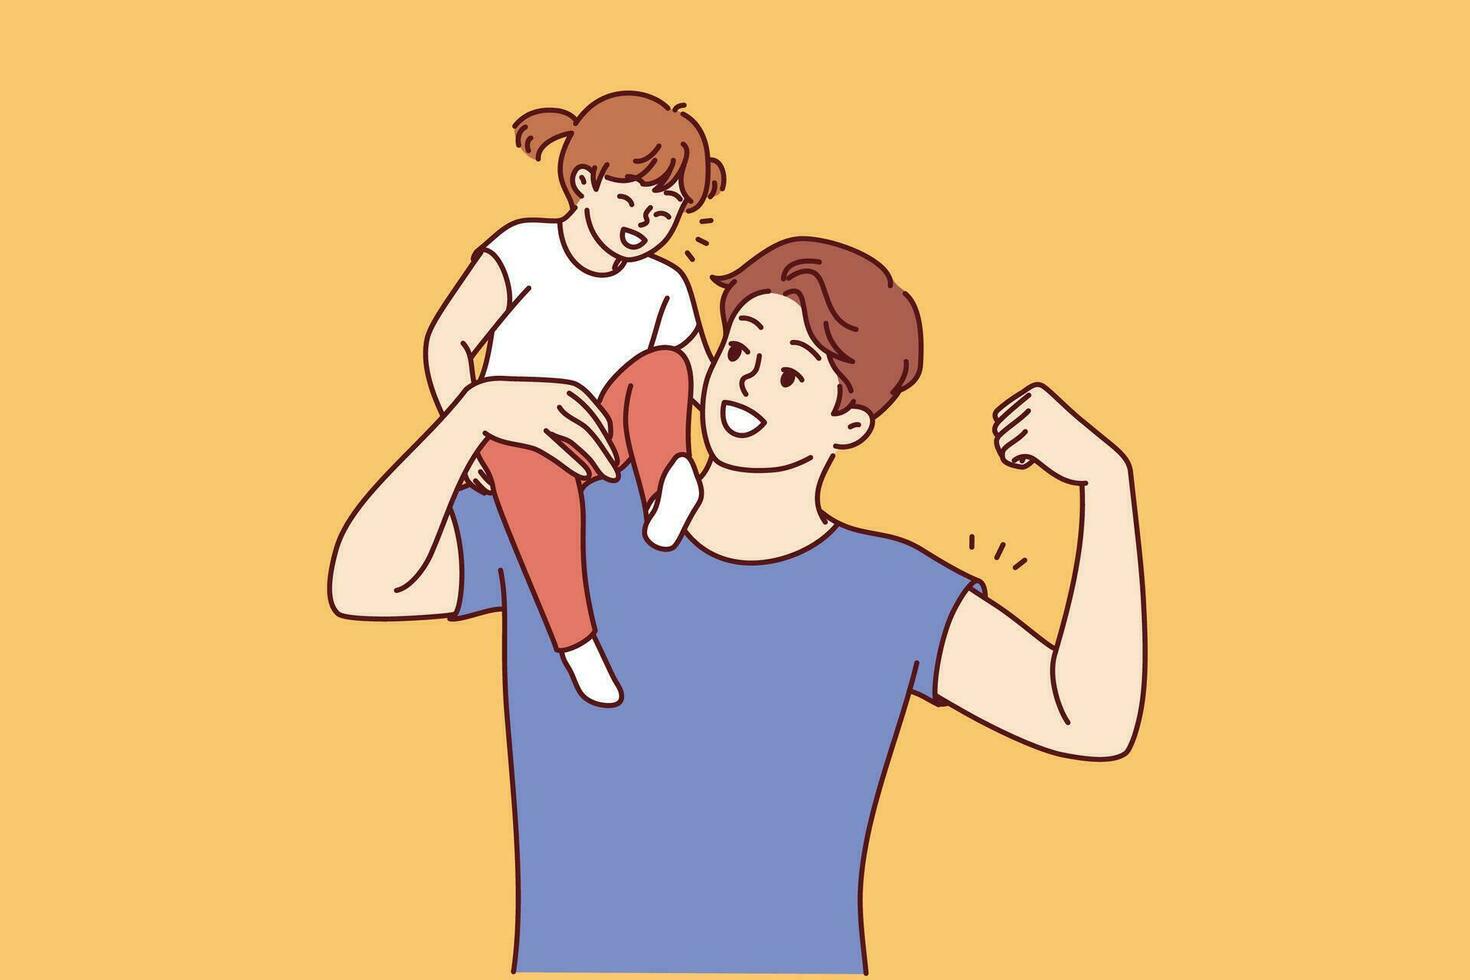 Strong man father holds daughter on shoulder and shows biceps to instill in child confidence in security. Little girl climbed on top of father and laughed, enjoying time spent with dad. vector